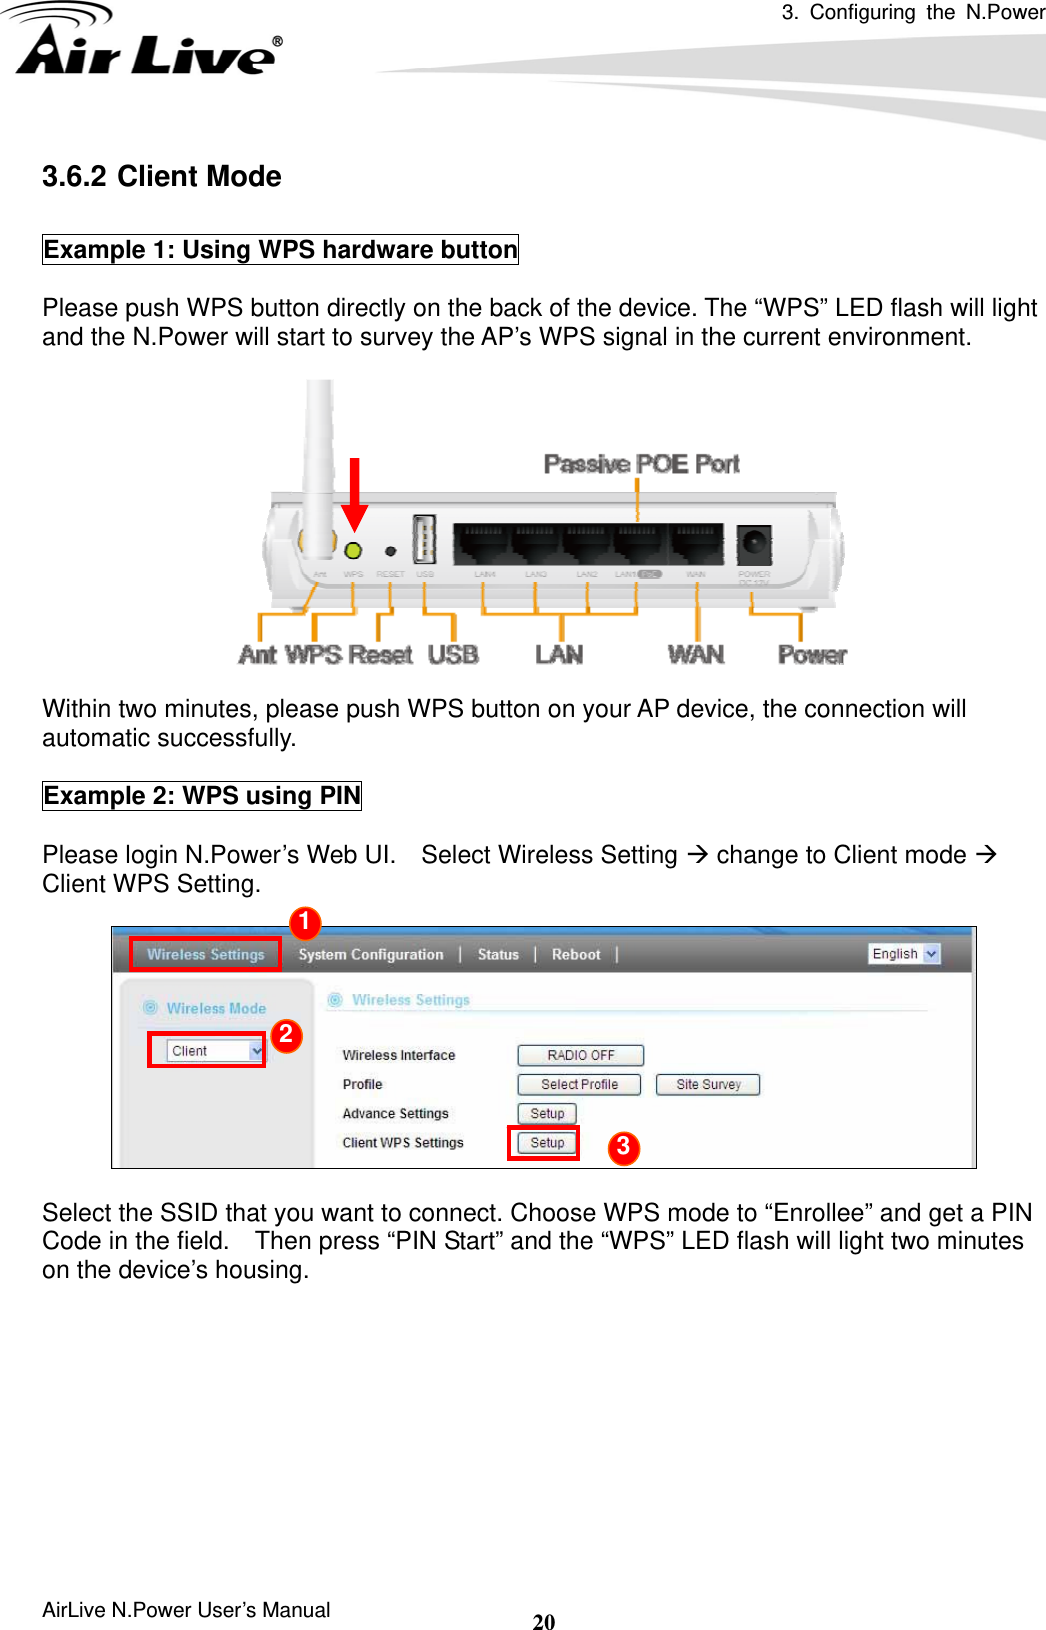 3. Configuring the N.Power  AirLive N.Power User’s Manual  203.6.2 Client Mode  Example 1: Using WPS hardware button  Please push WPS button directly on the back of the device. The “WPS” LED flash will light and the N.Power will start to survey the AP’s WPS signal in the current environment.   Within two minutes, please push WPS button on your AP device, the connection will automatic successfully.  Example 2: WPS using PIN  Please login N.Power’s Web UI.    Select Wireless Setting Æ change to Client mode Æ Client WPS Setting.    Select the SSID that you want to connect. Choose WPS mode to “Enrollee” and get a PIN Code in the field.    Then press “PIN Start” and the “WPS” LED flash will light two minutes on the device’s housing.     1 2 3 